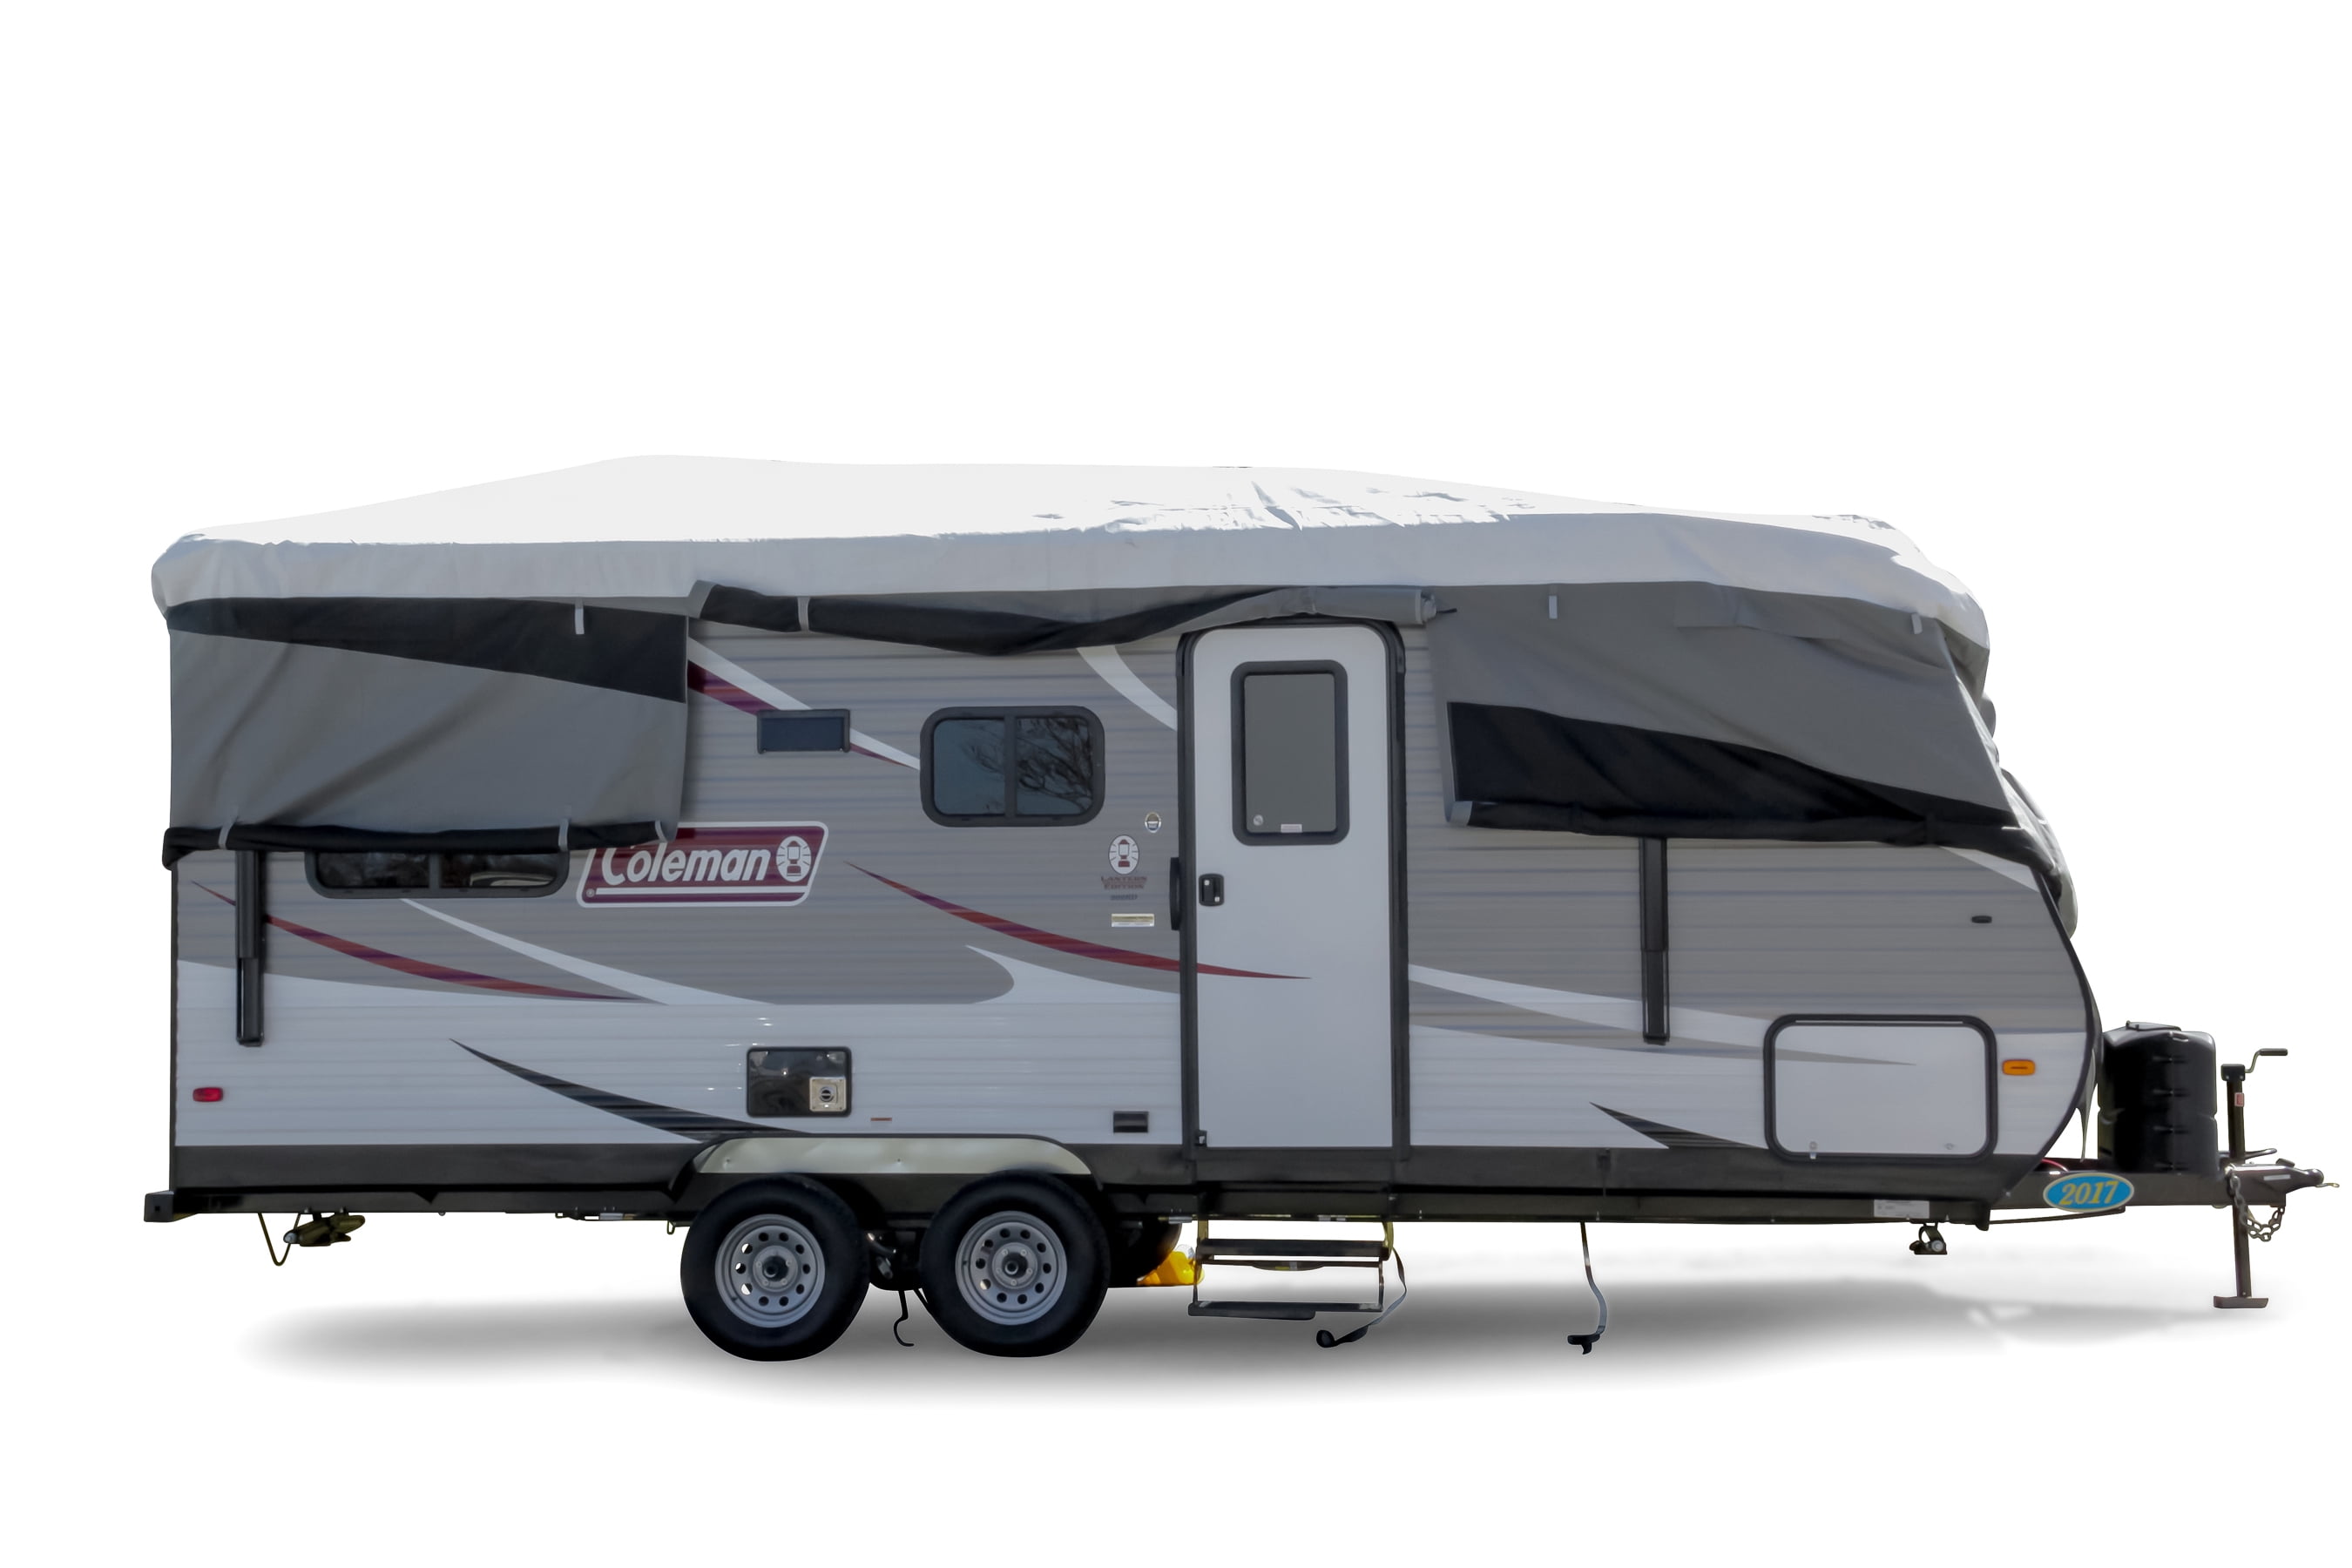  Camco ULTRAGuard 34-36-Ft 5th Wheel Trailer RV Cover, Features  Zipper Entry Doors & Covered Air Vents, Crafted of Spunbond Polypropylene